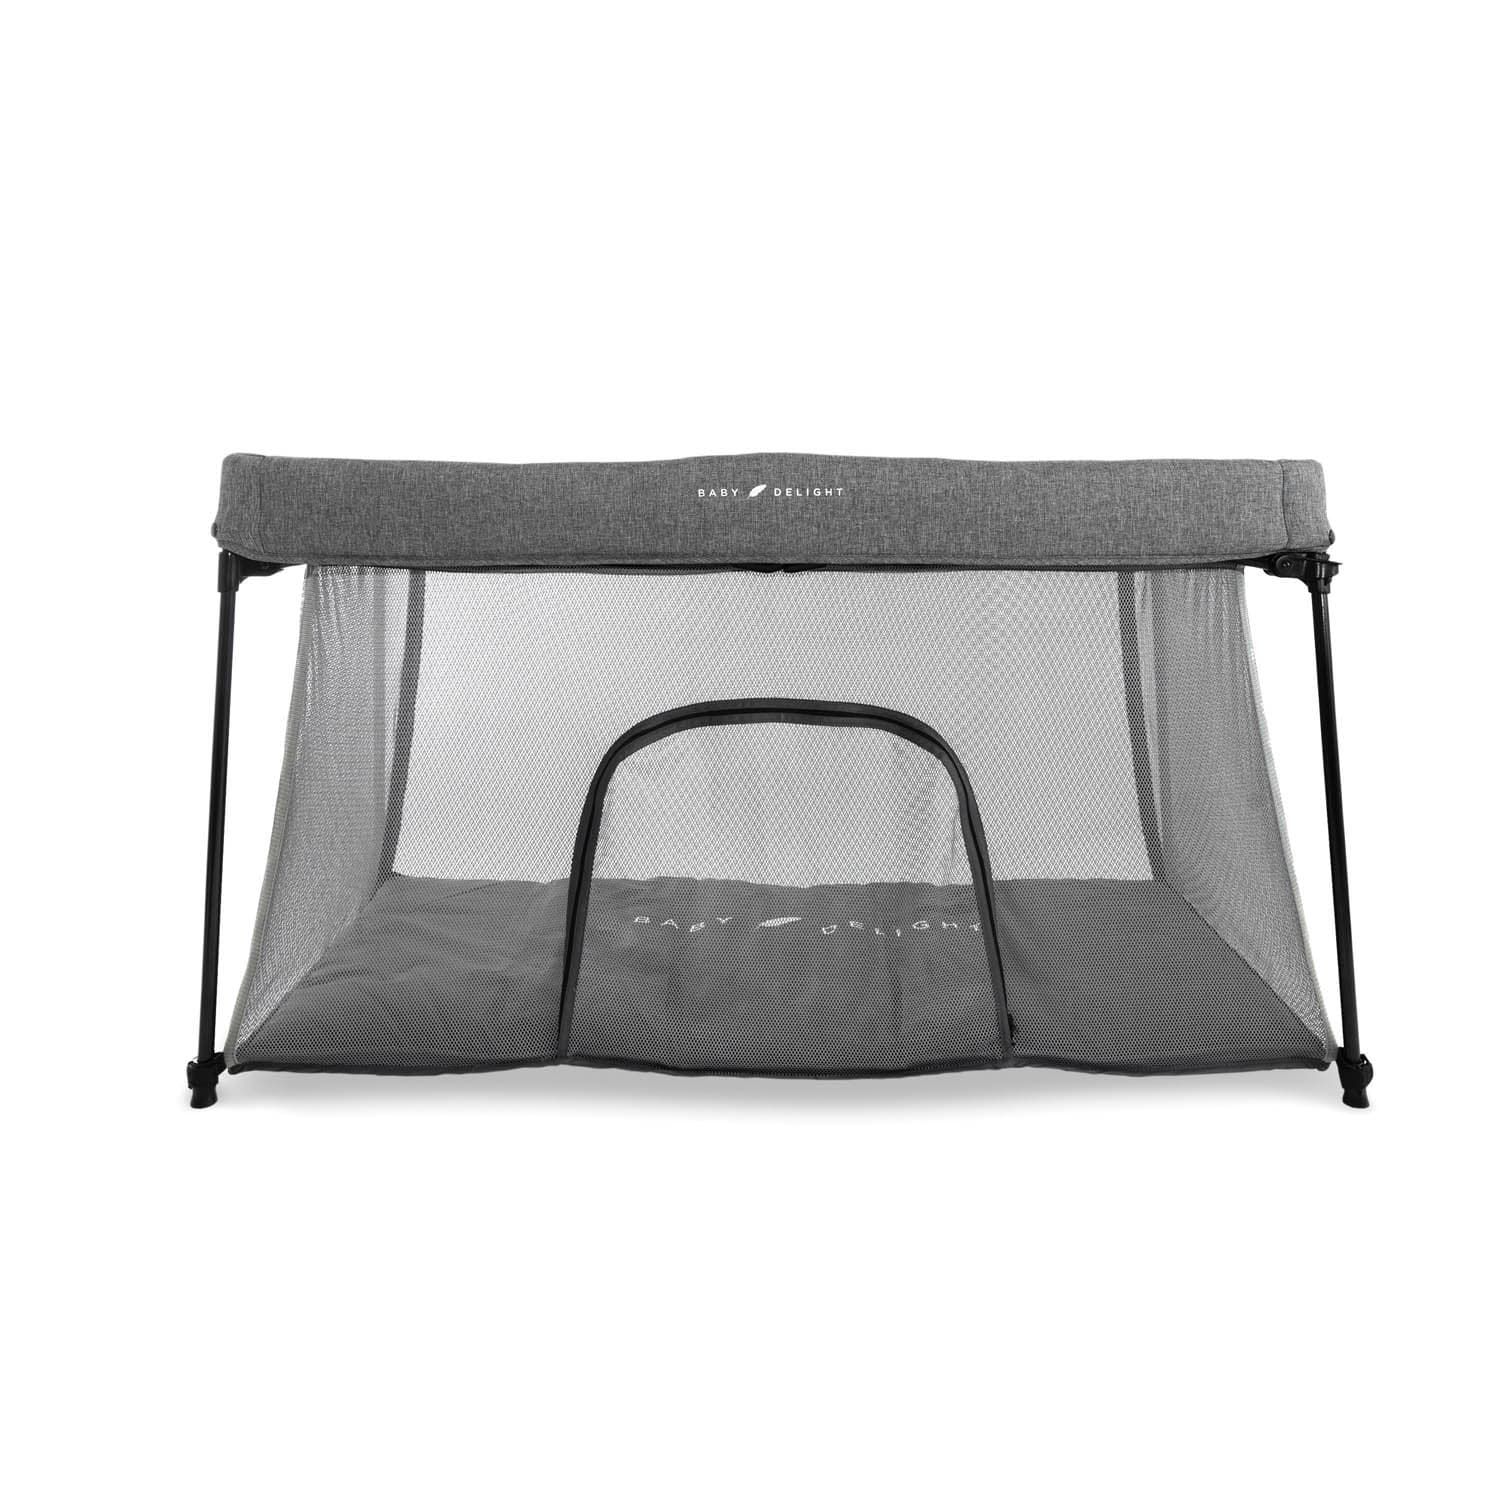 Nod Deluxe Portable Travel Crib - Charcoal Tweed | Baby Delight